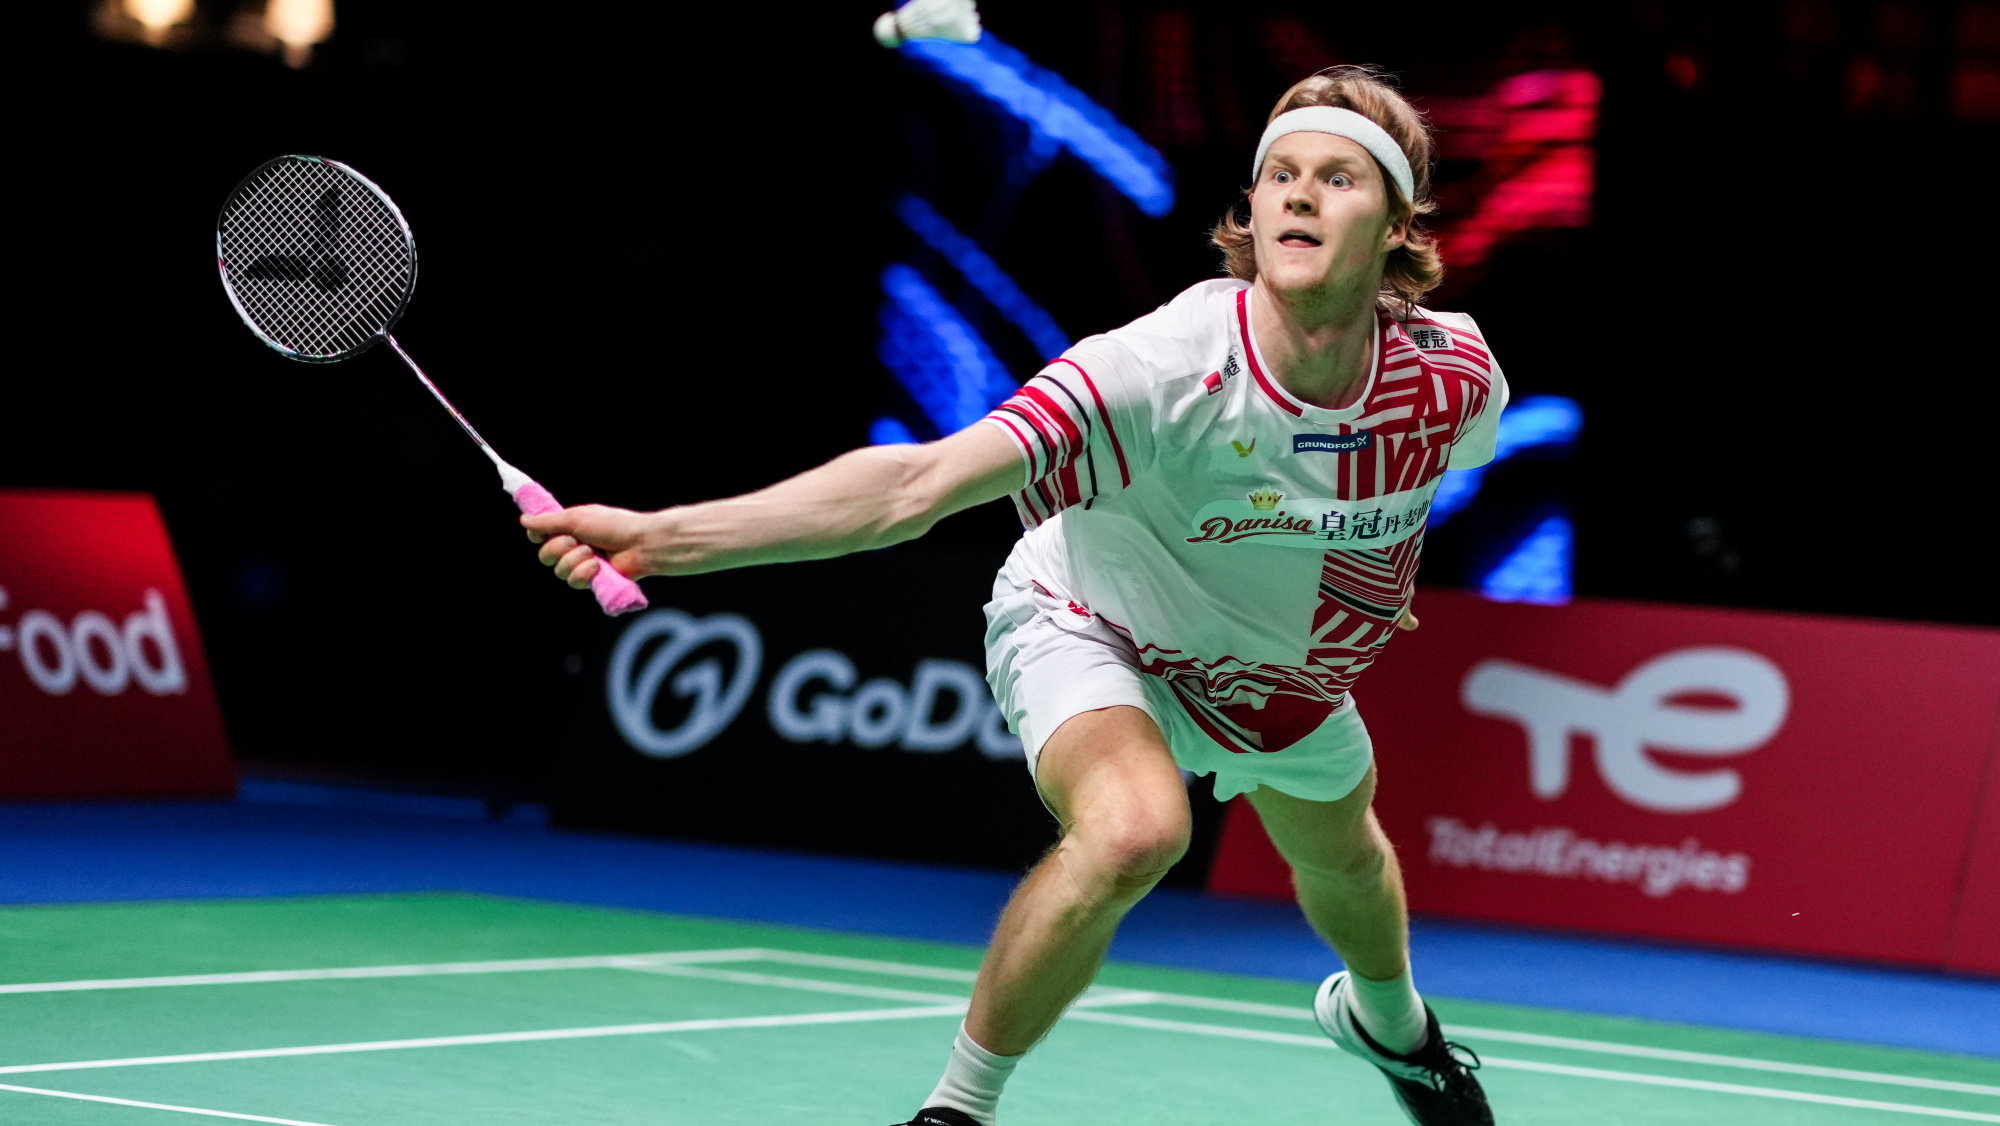 How to watch Open 2021 badminton live streams from anywhere | TechRadar